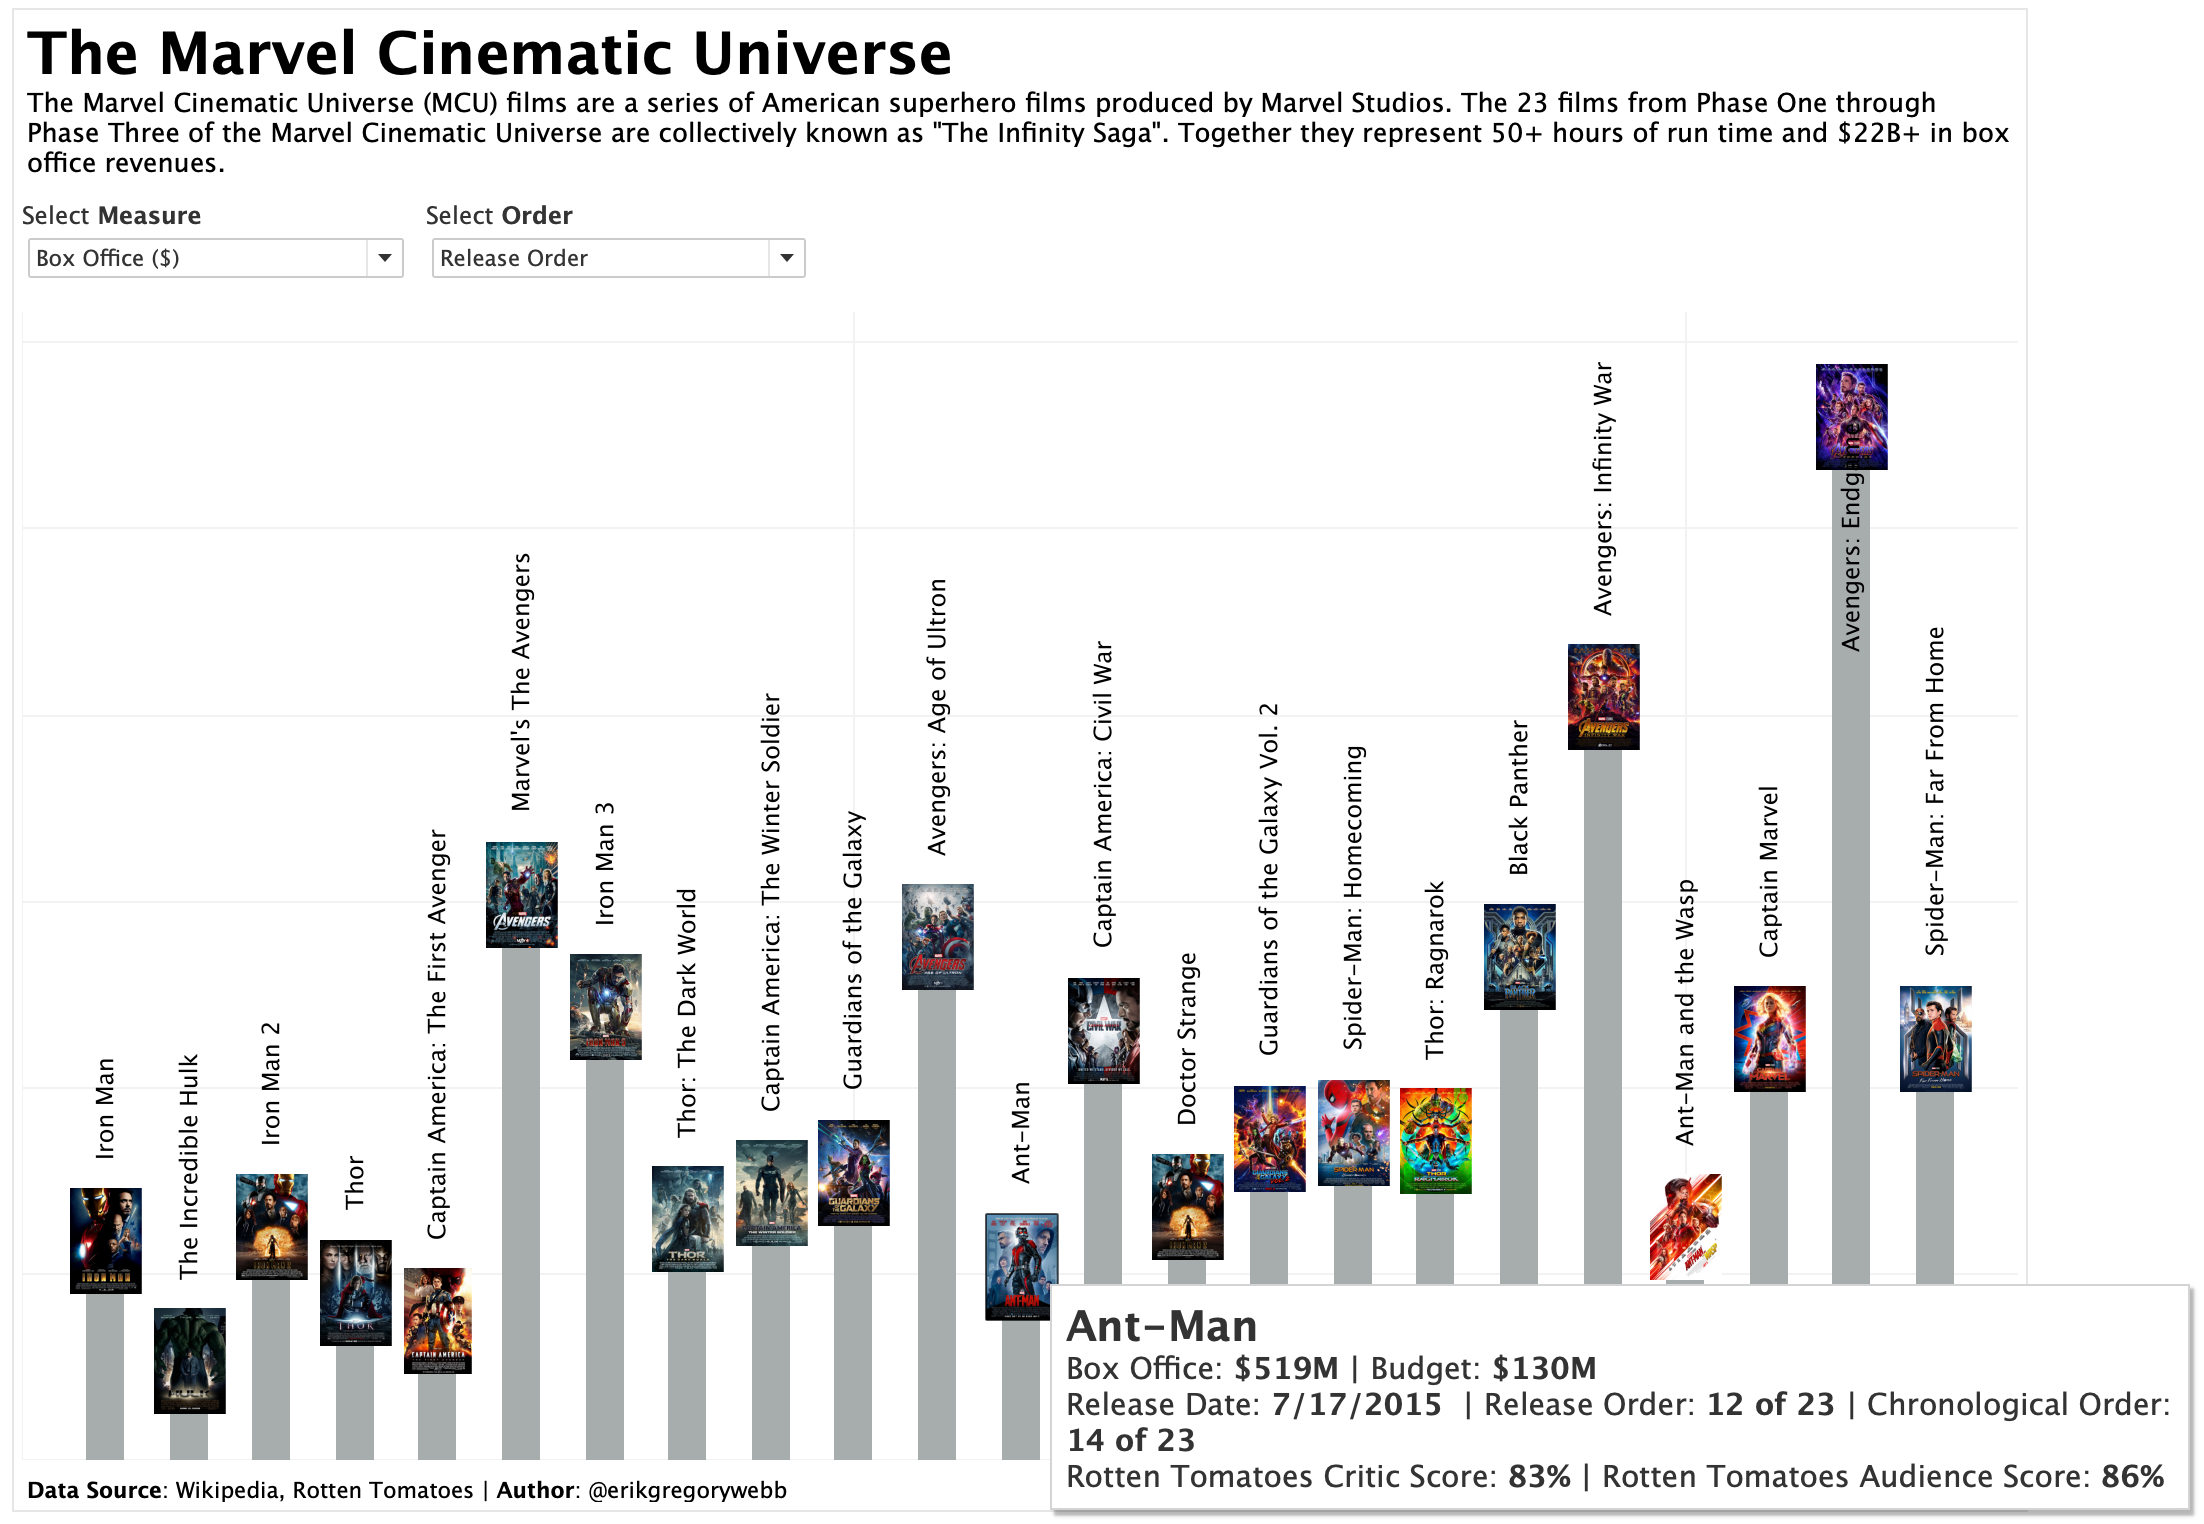 Exploring the Marvel Cinematic Universe in Tableau - Unboxed Analytics